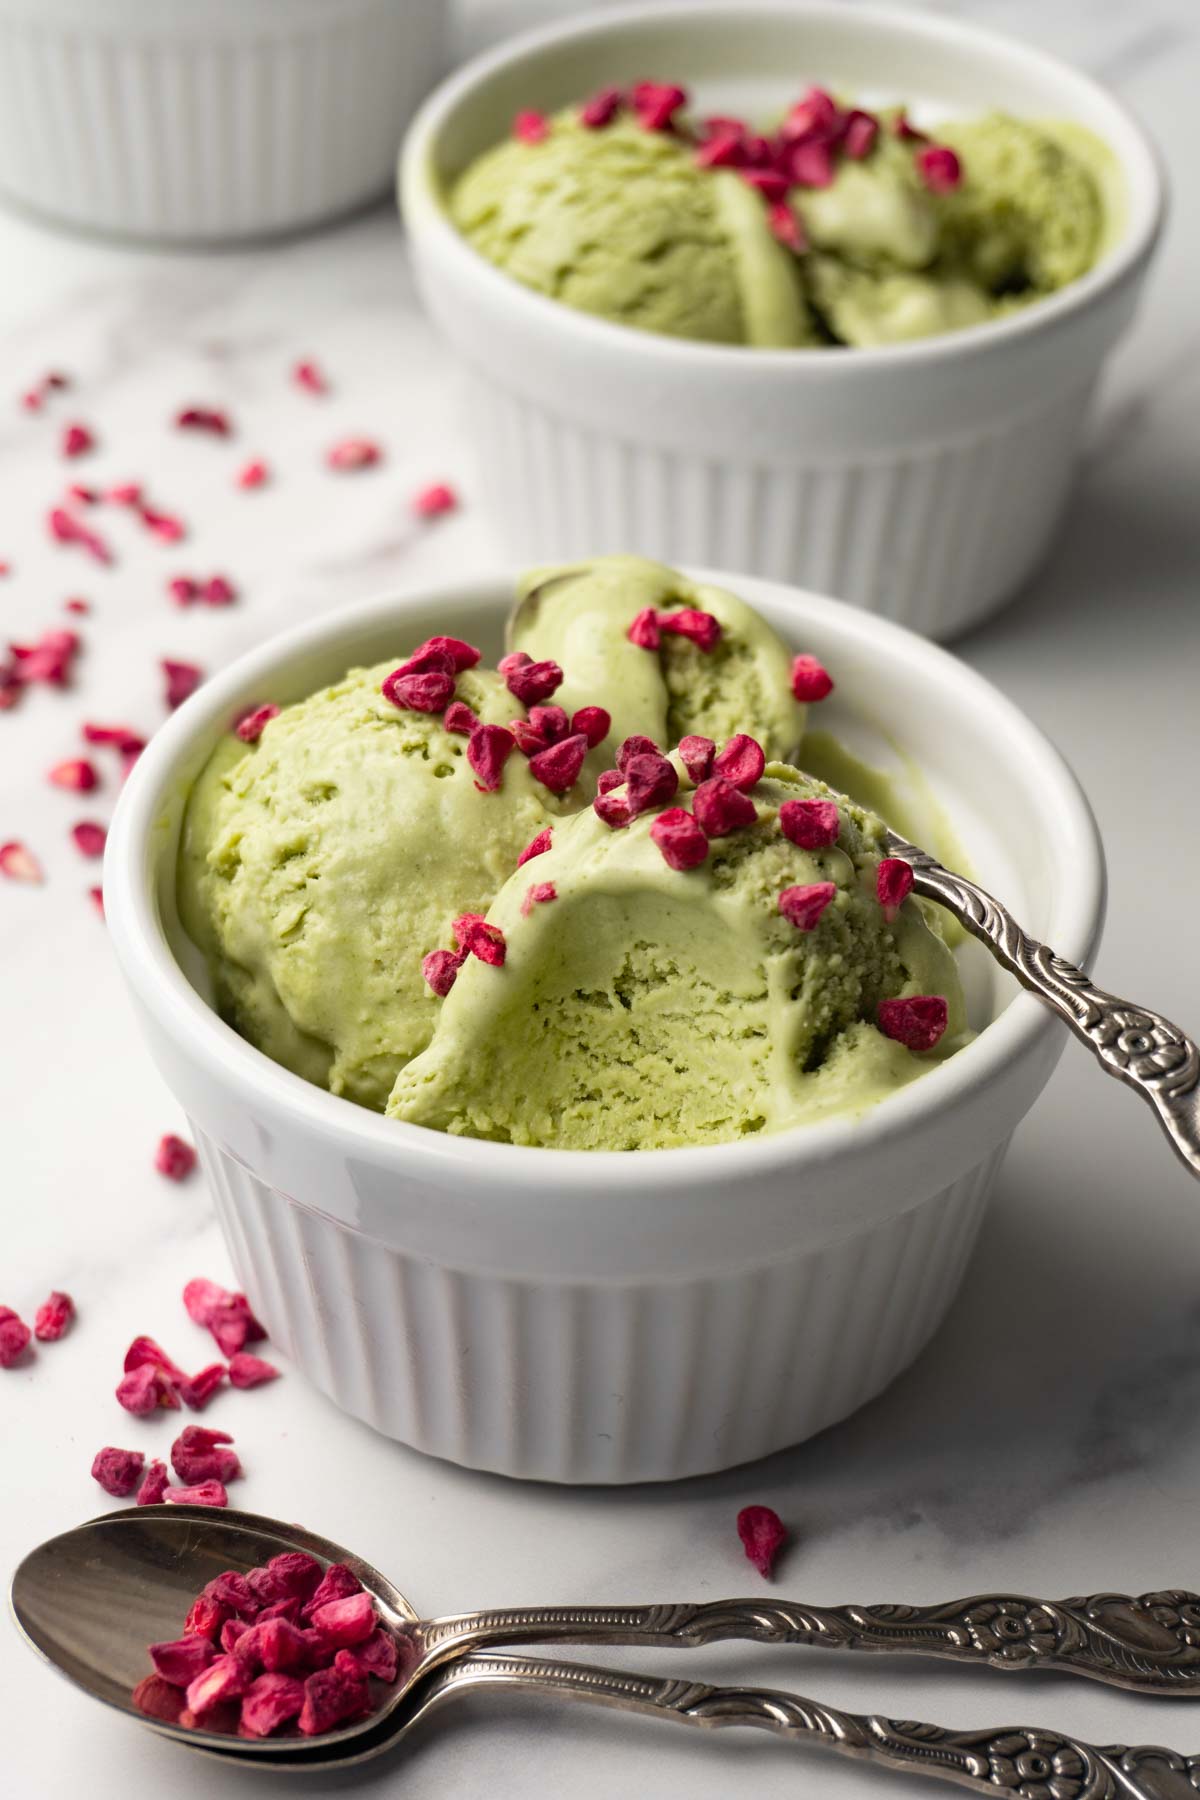 A white ramekin filled with green ice cream topped with freeze-dried raspberries; one spoon was taken